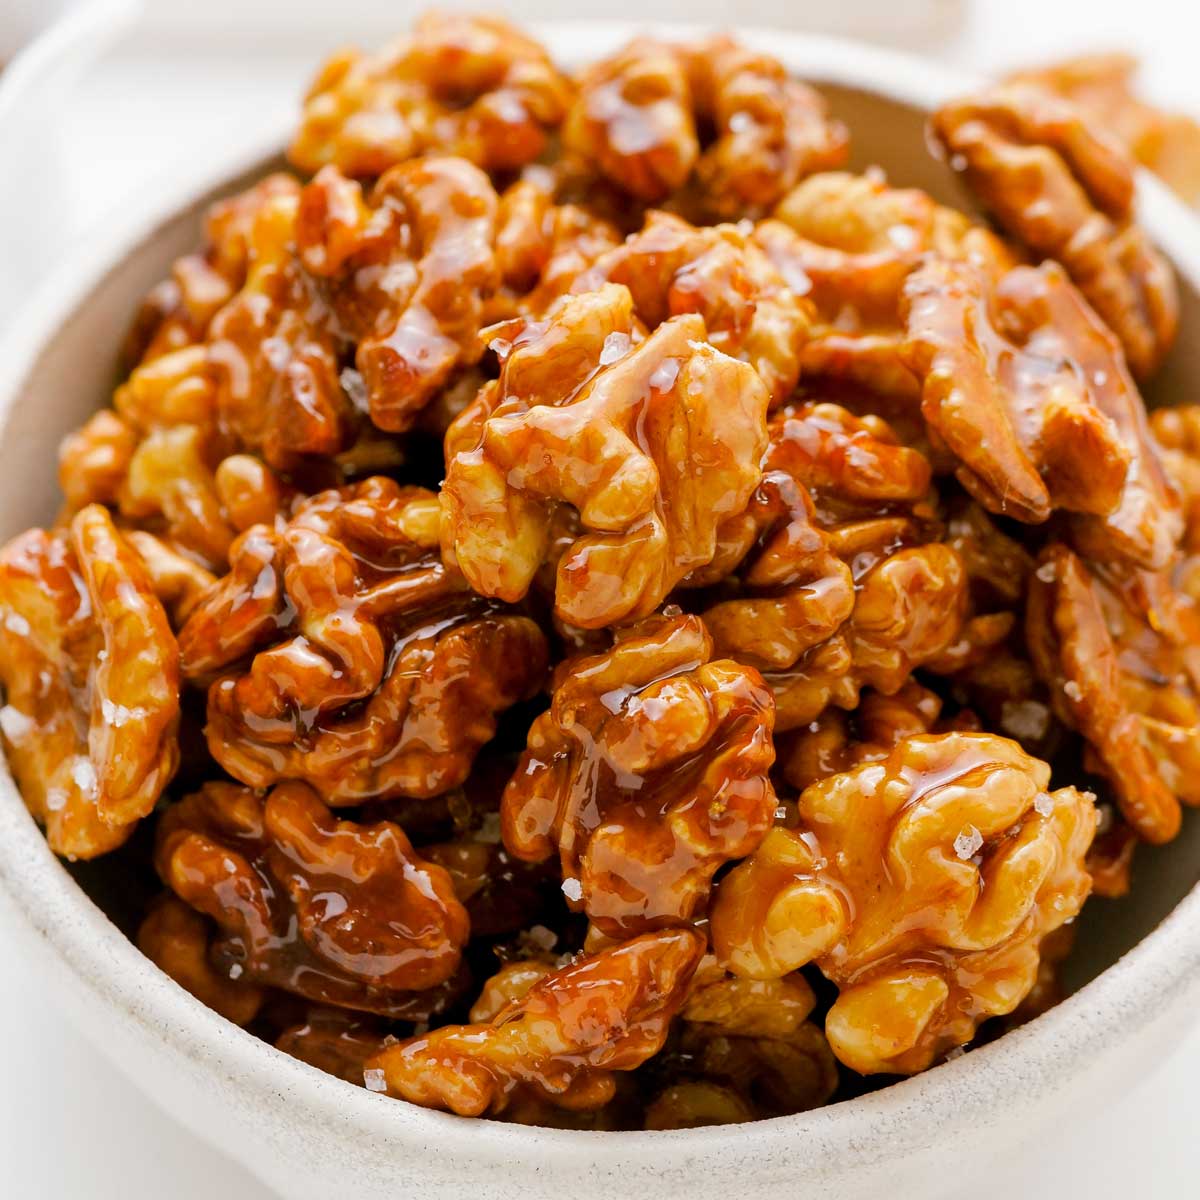 How To Make Easy Honey Glazed Candied Walnuts